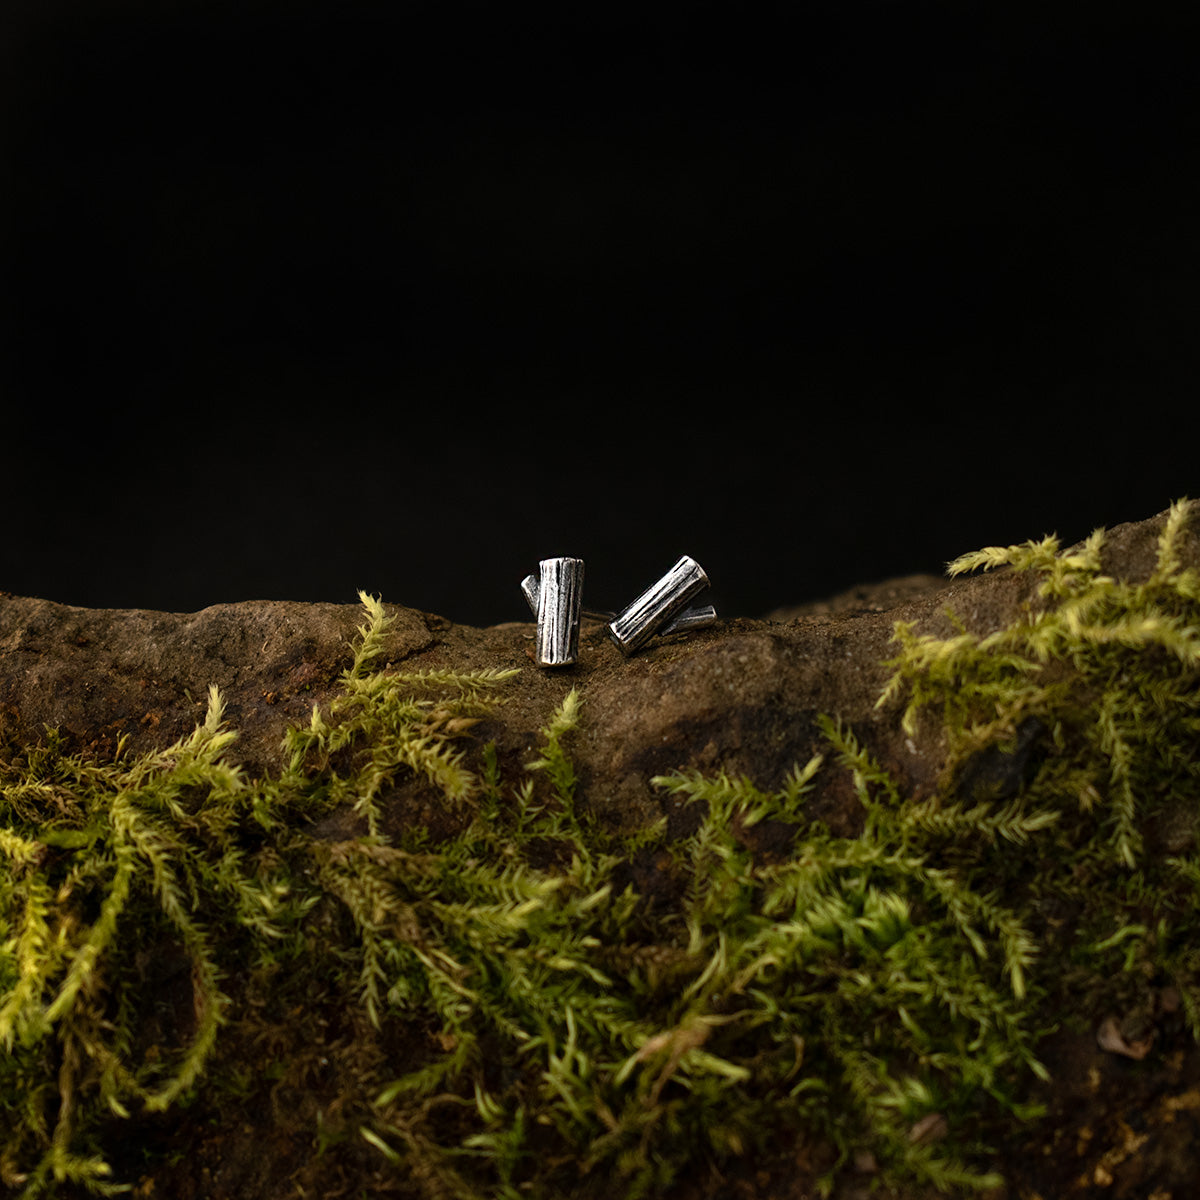 Two teeny tiny sterling silver stud earrings sit side by side, each a miniature sculpture formed like a wooden log.